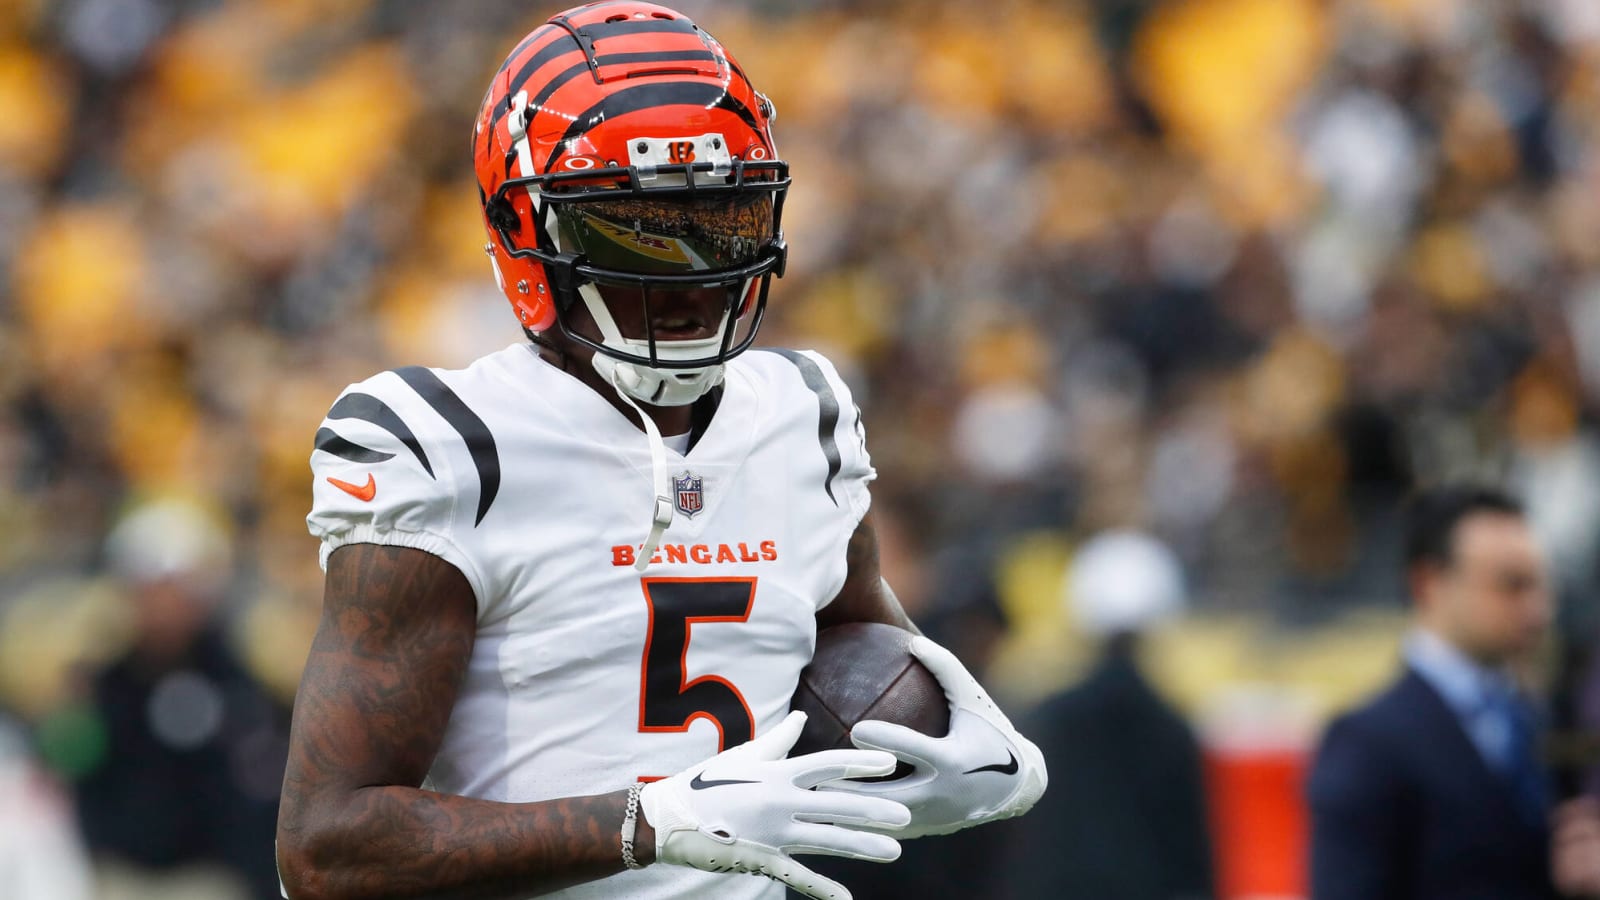 Bengals receiver reportedly not expected to sign tender soon